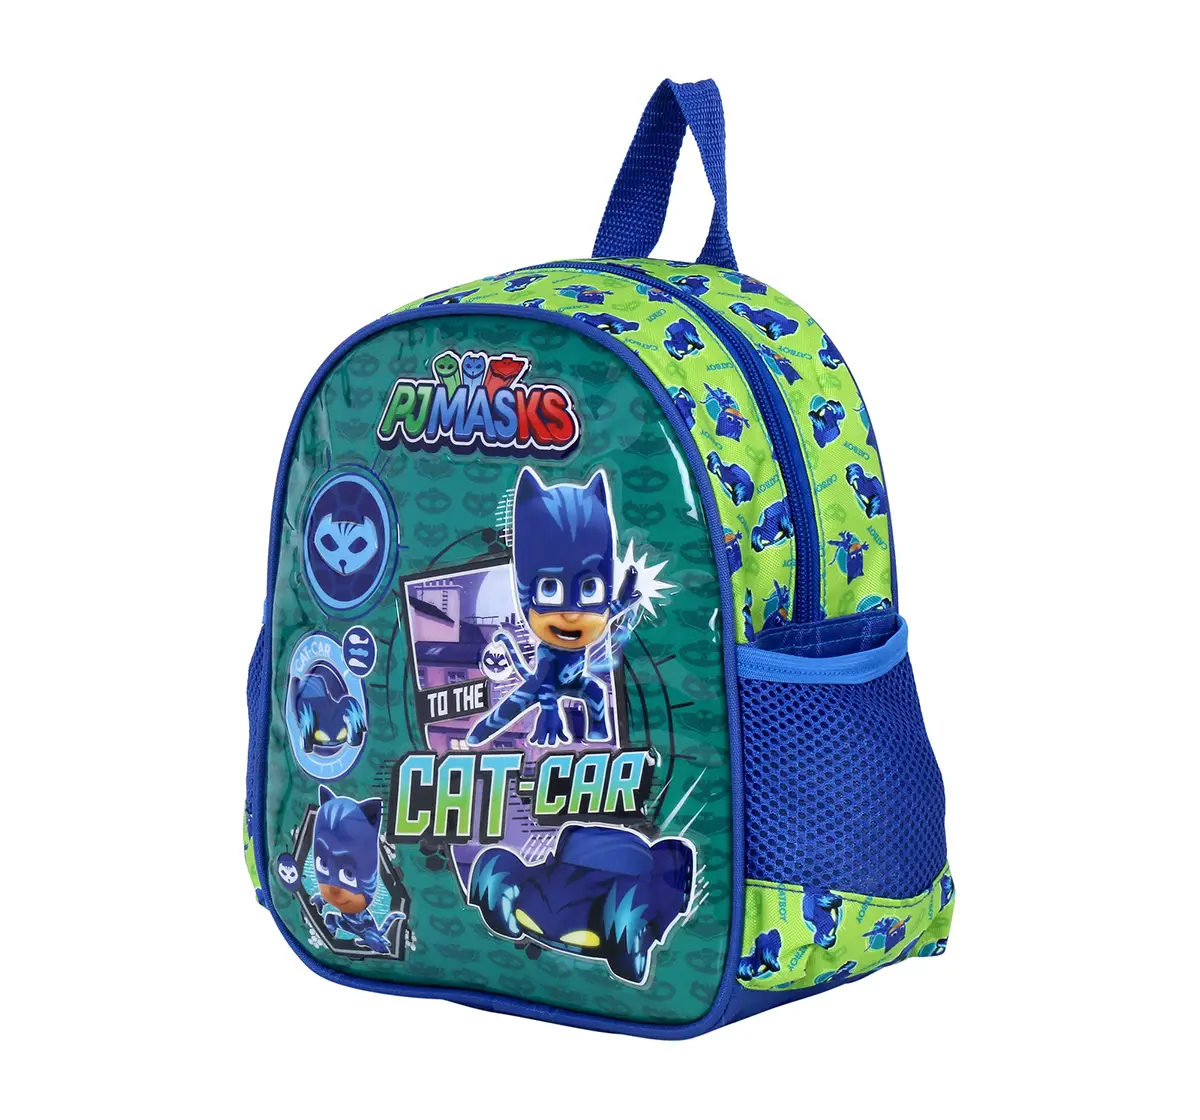  Pj Mask Cat Car 10 Backpack Bags for Kids age 3Y+ 